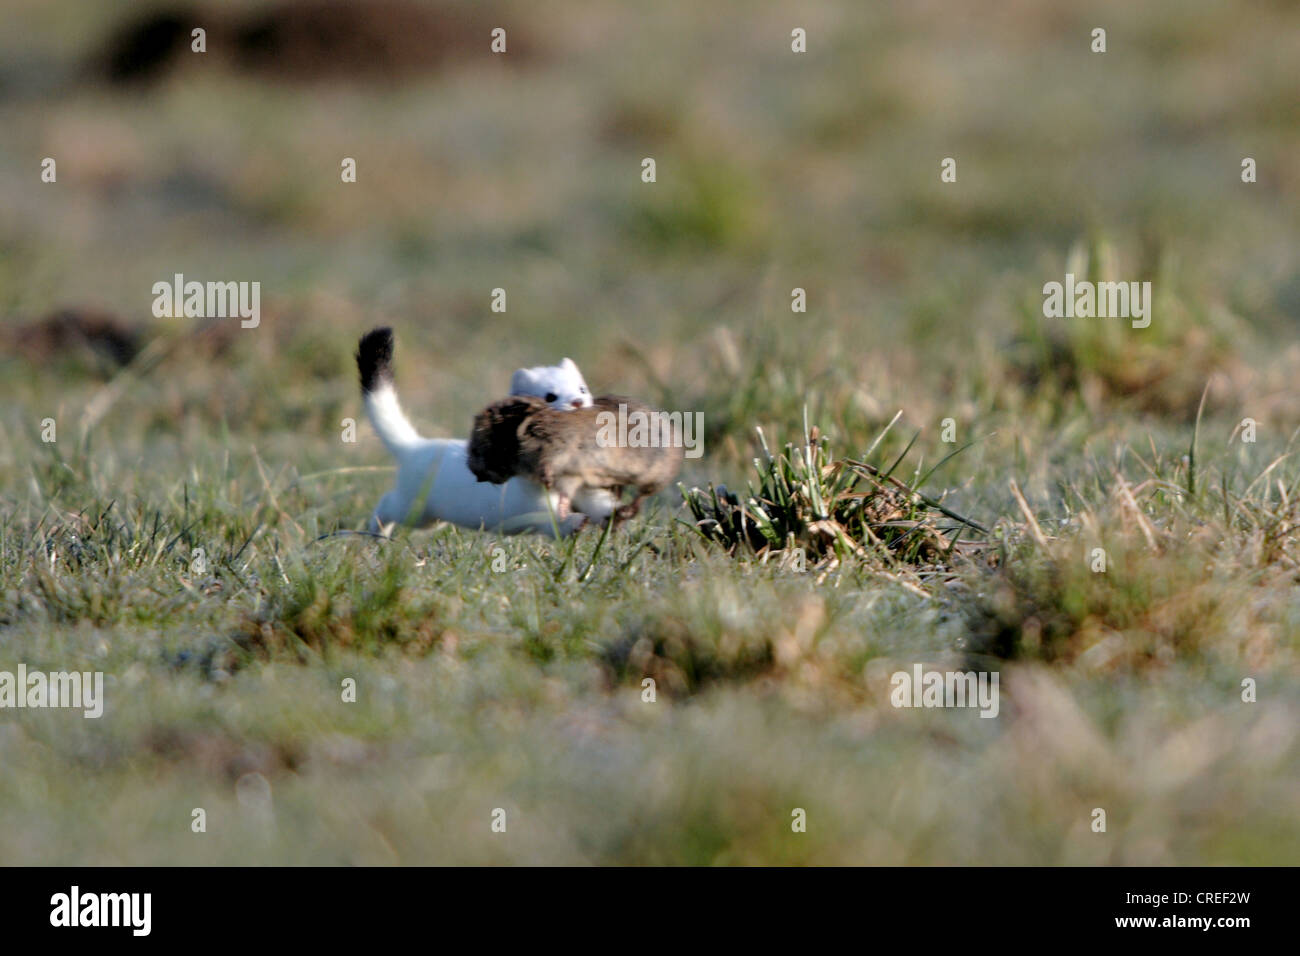 ermine, stoat (Mustela erminea), running over meadow with catched vole in the mouth, Germany, Bavaria Stock Photo